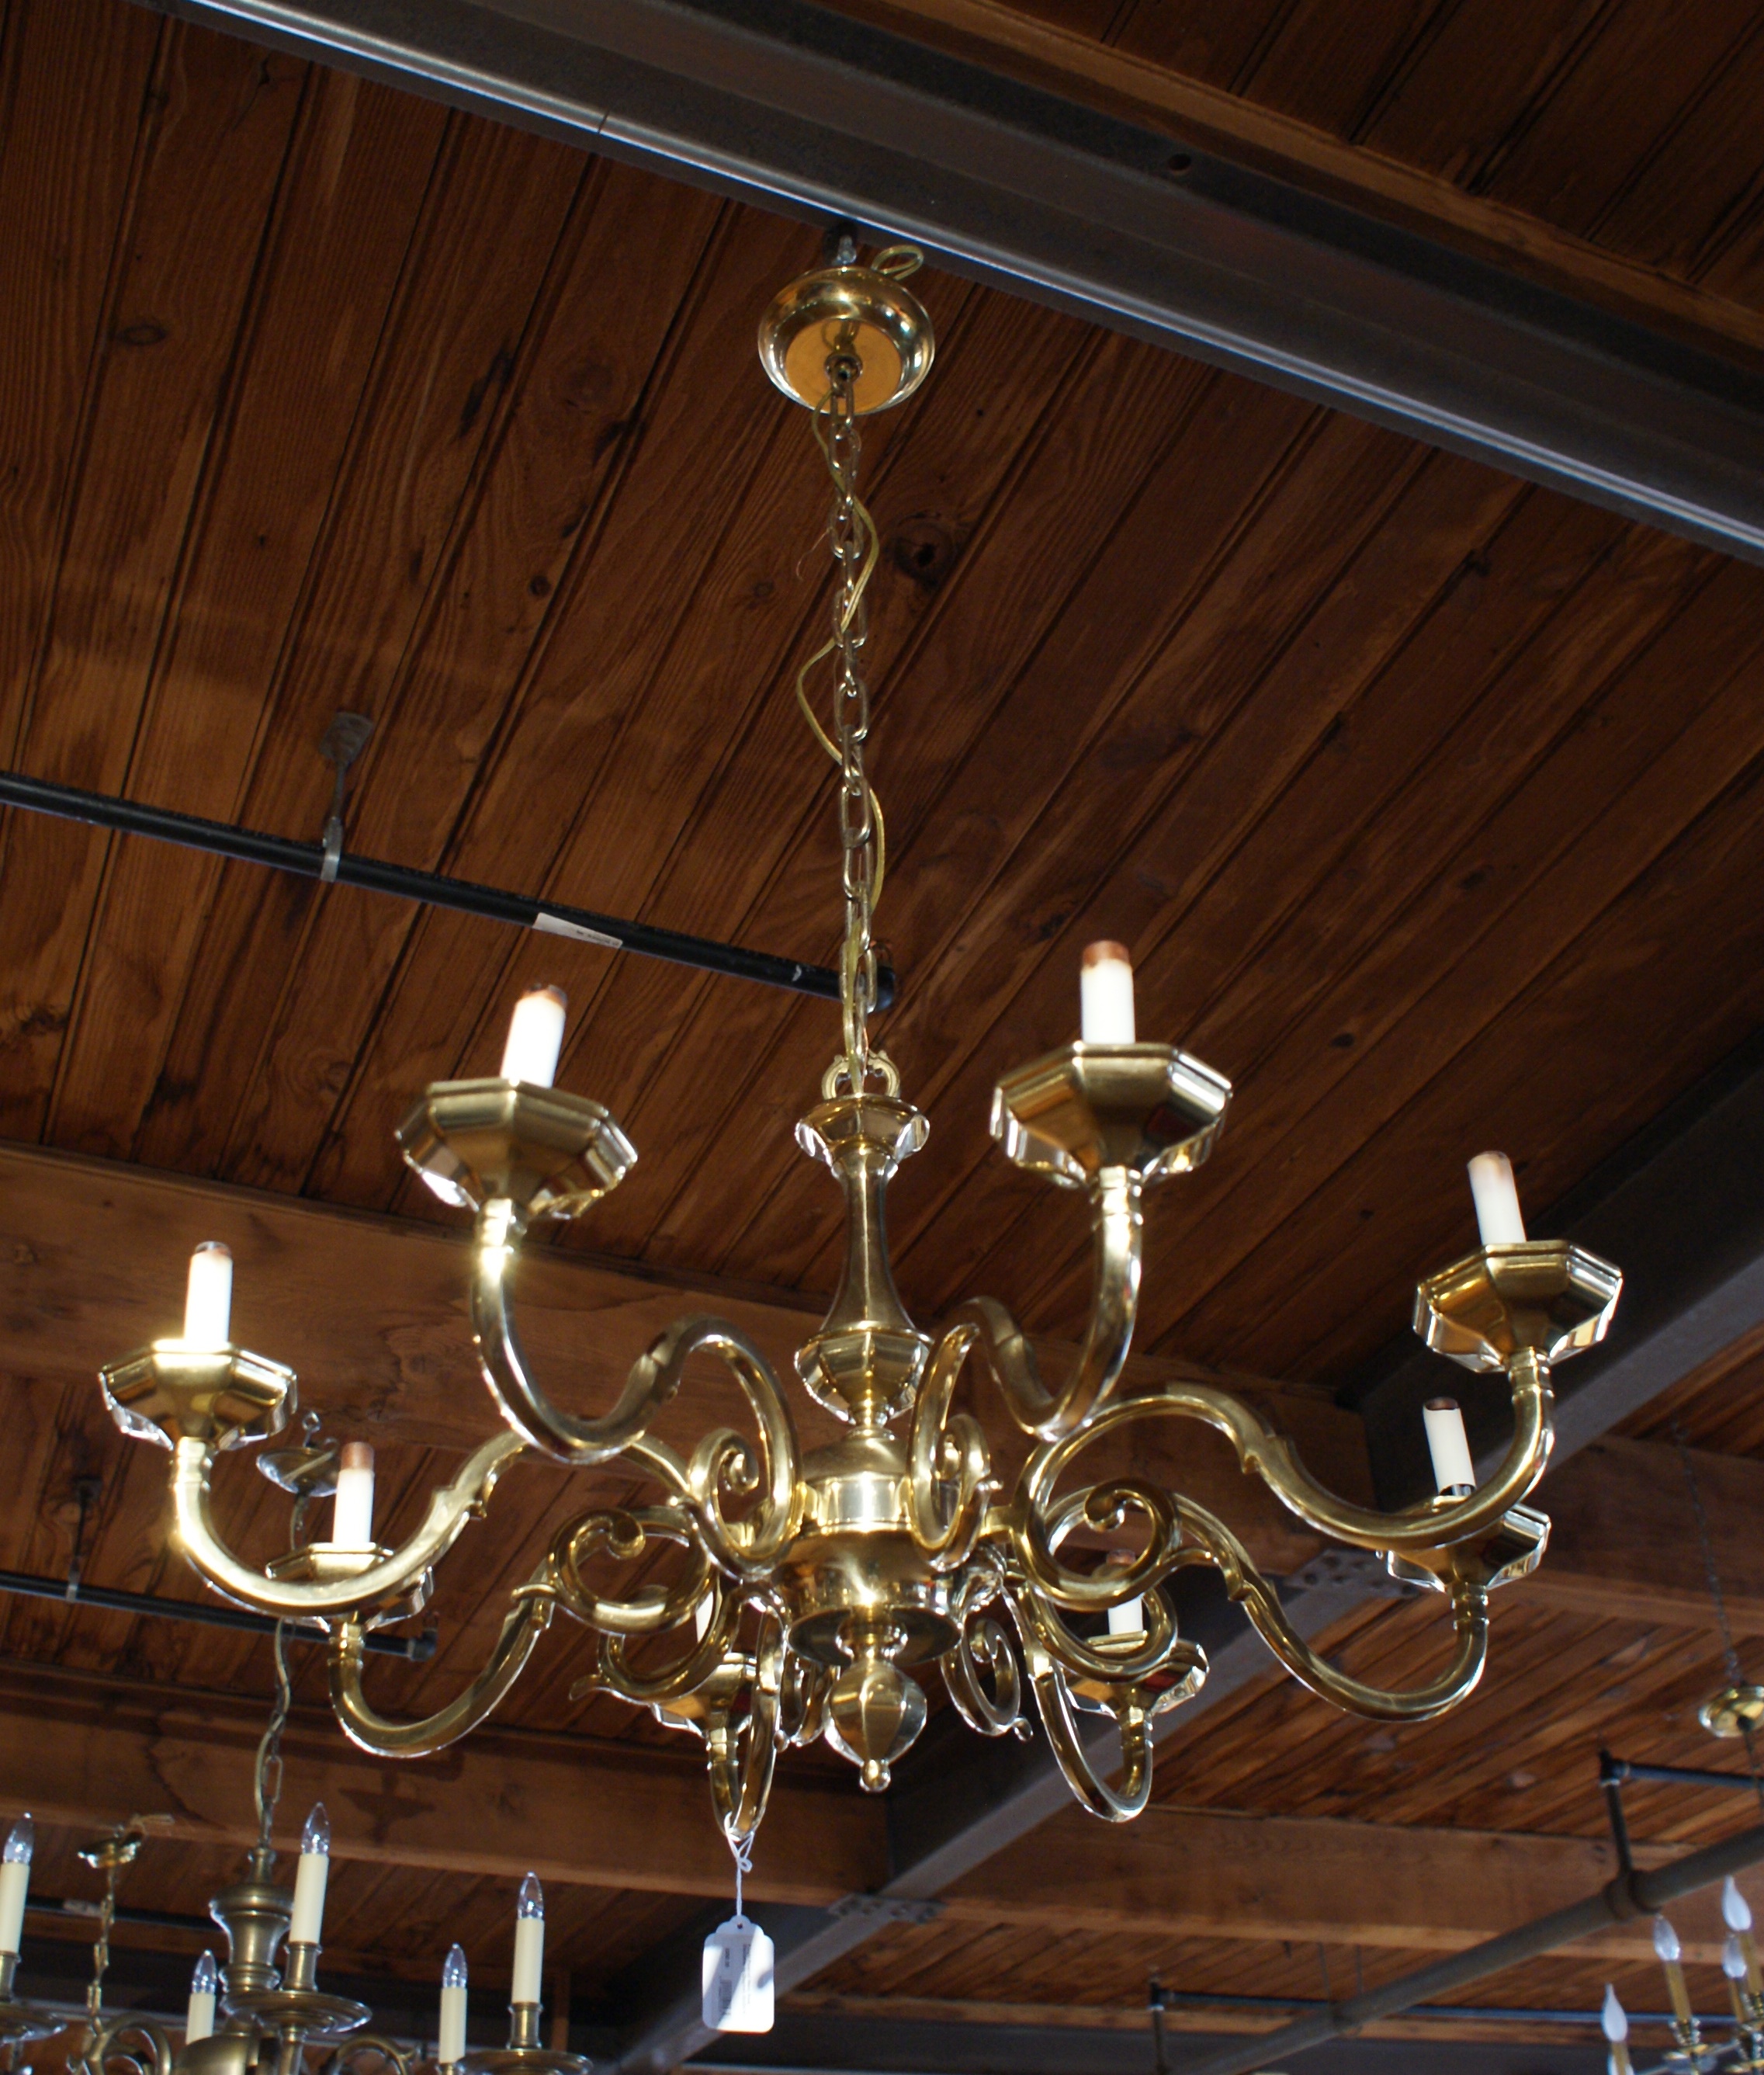 How To Hang A Heavy Chandelier?